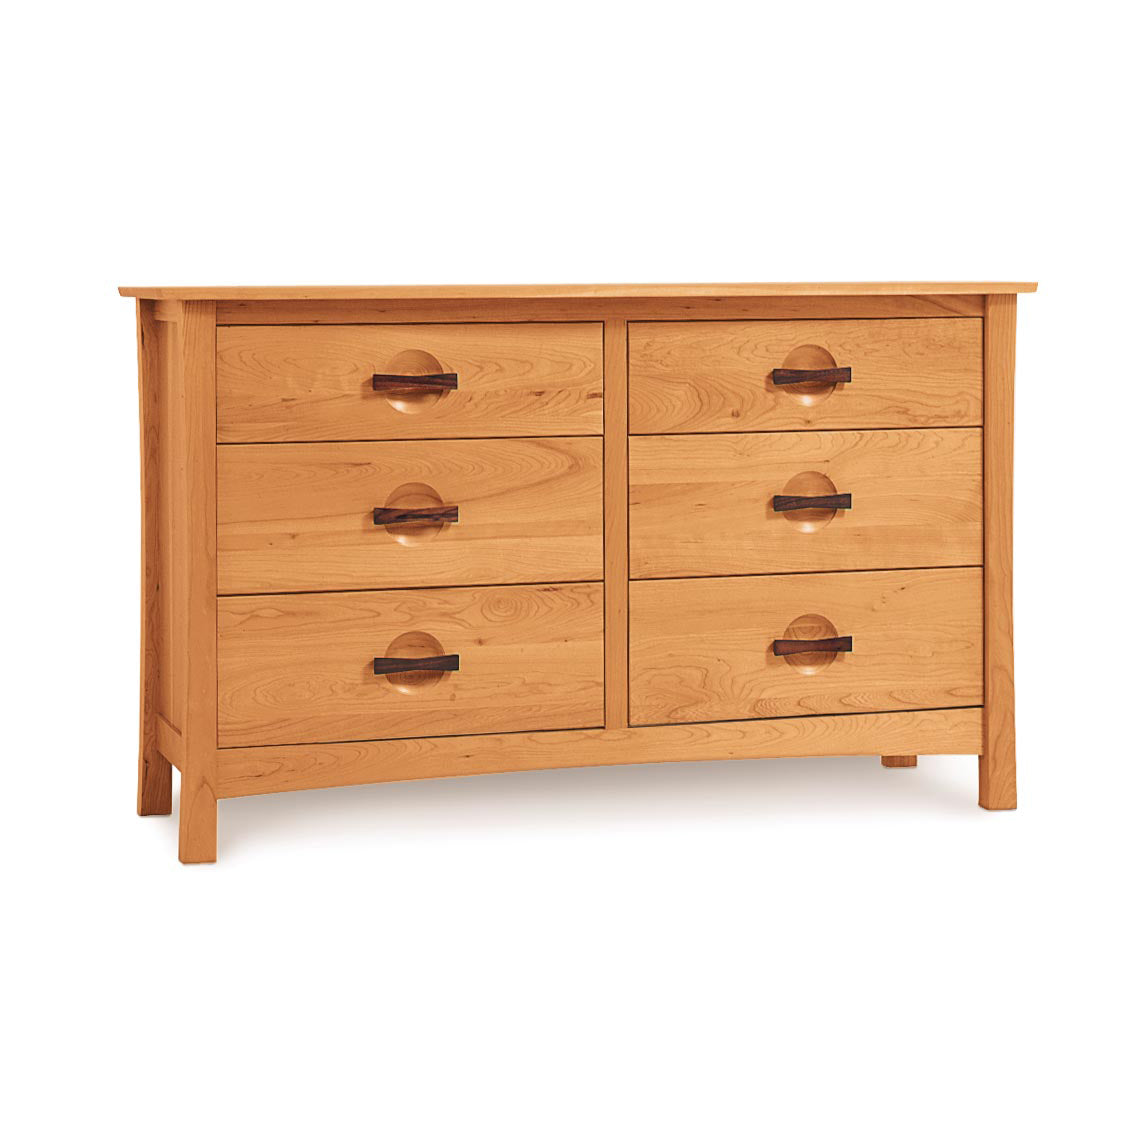 A handmade Berkeley 6-Drawer Dresser from Copeland Furniture with a simple, traditional design and round handles on a plain white background.